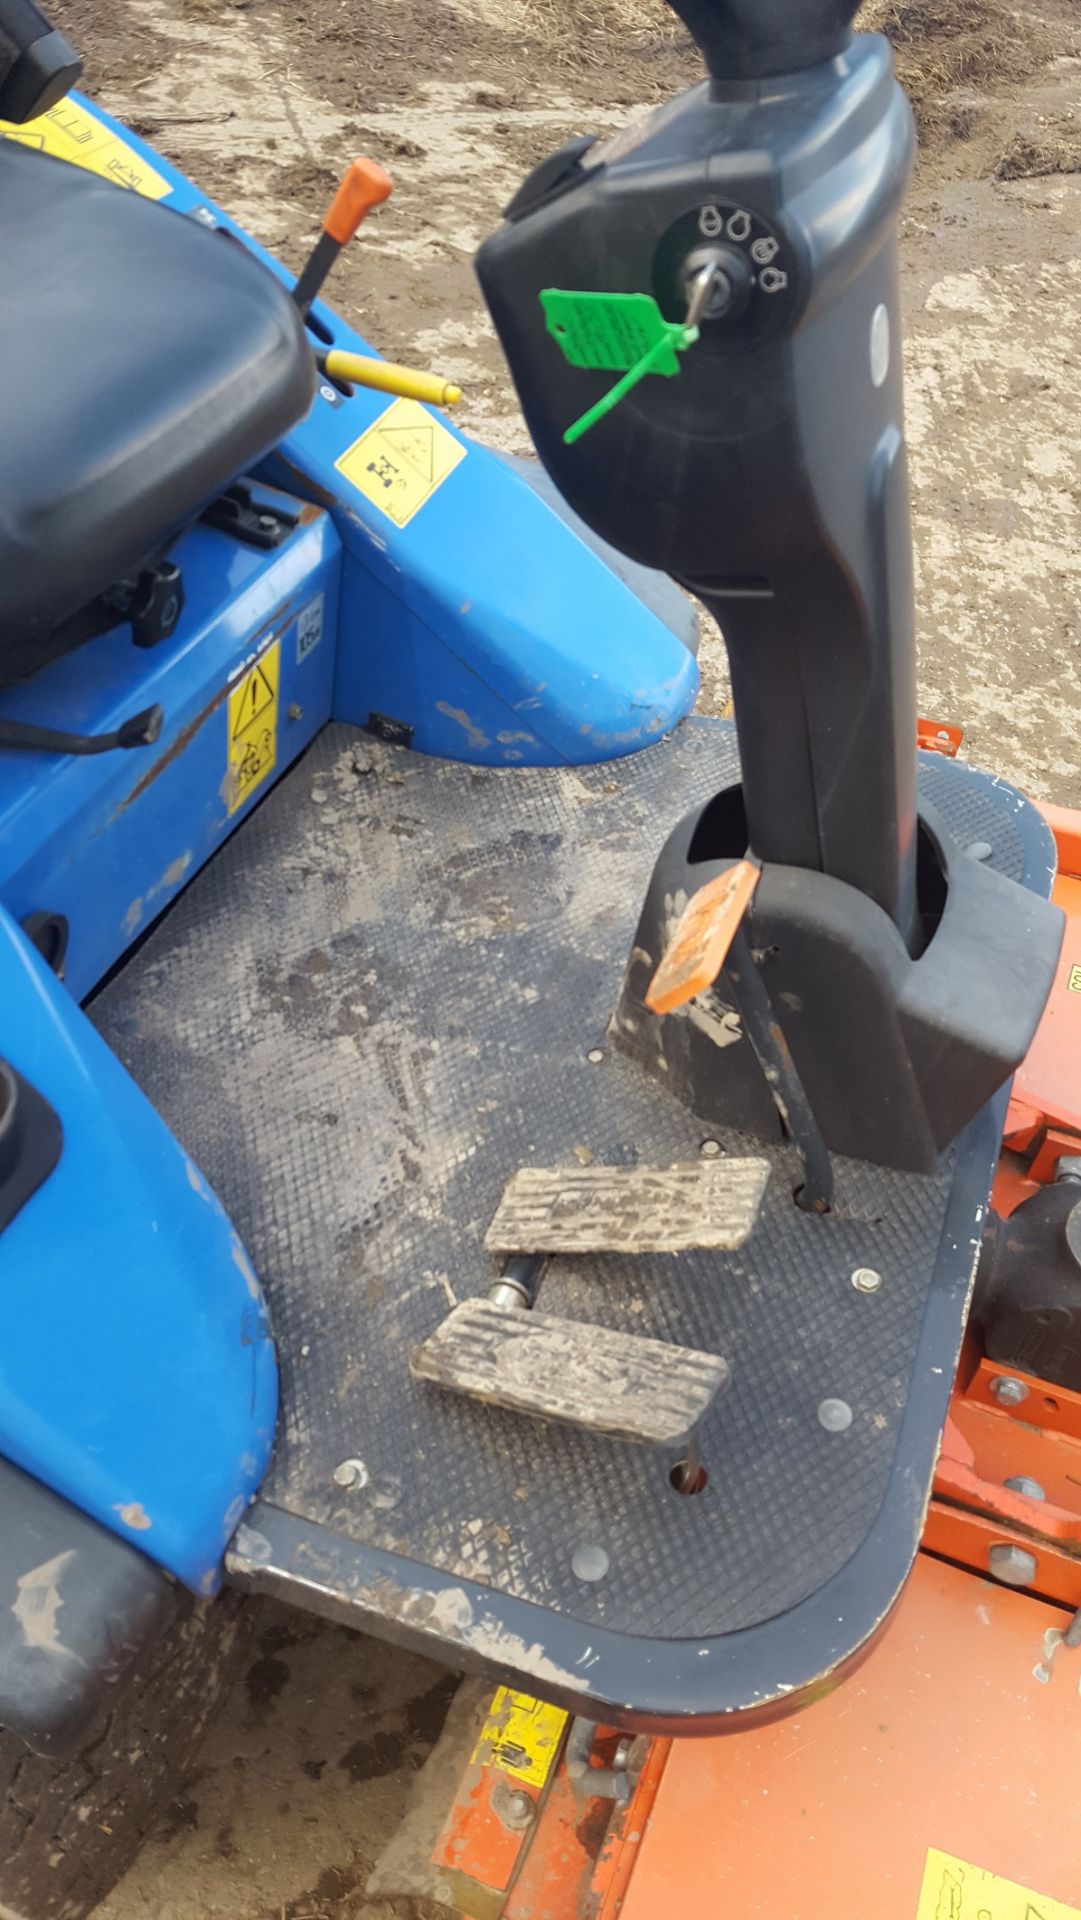 2010/60 REG NEW HOLLAND MC35 4WD RIDE ON LAWN MOWER LOW HOURS *PLUS VAT* - Image 5 of 7